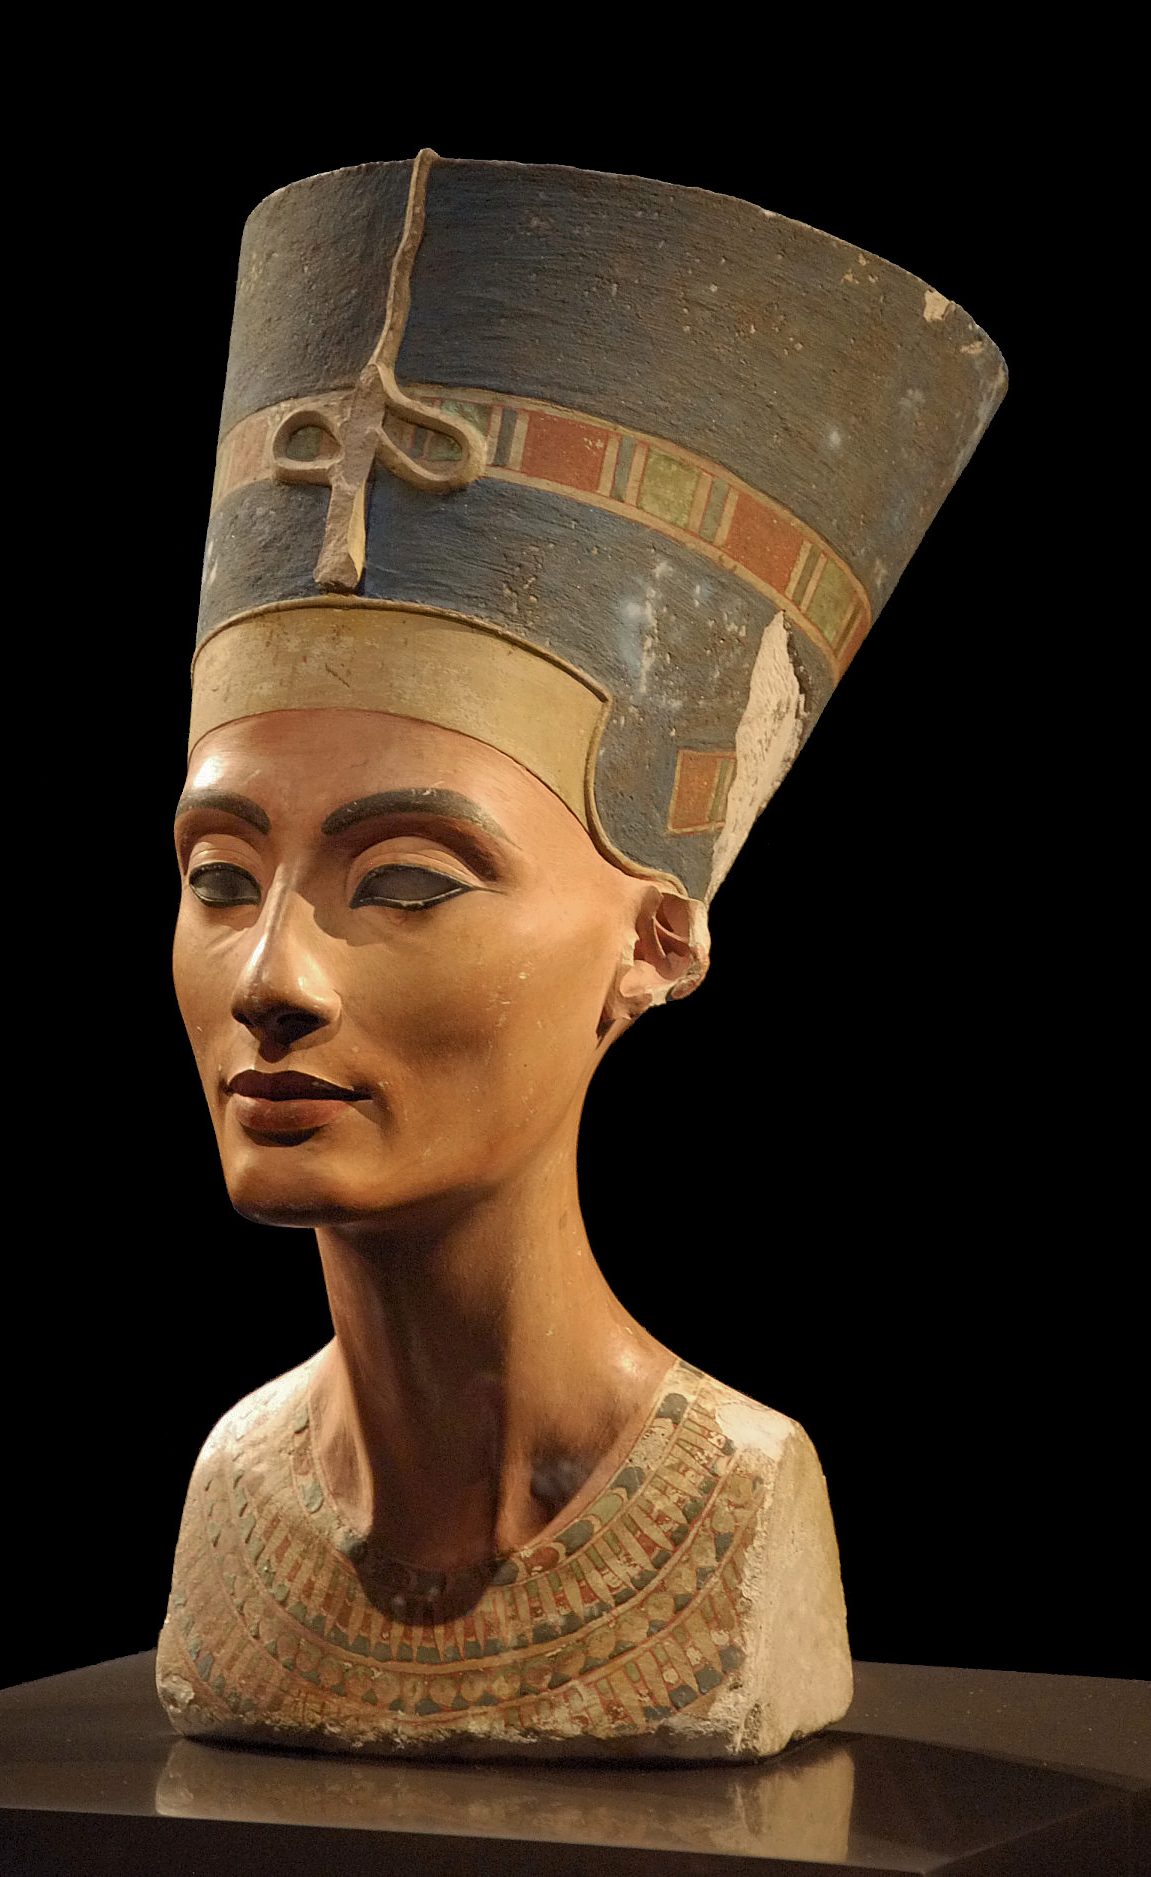 nefertiti: the mysterious queen of ancient egypt